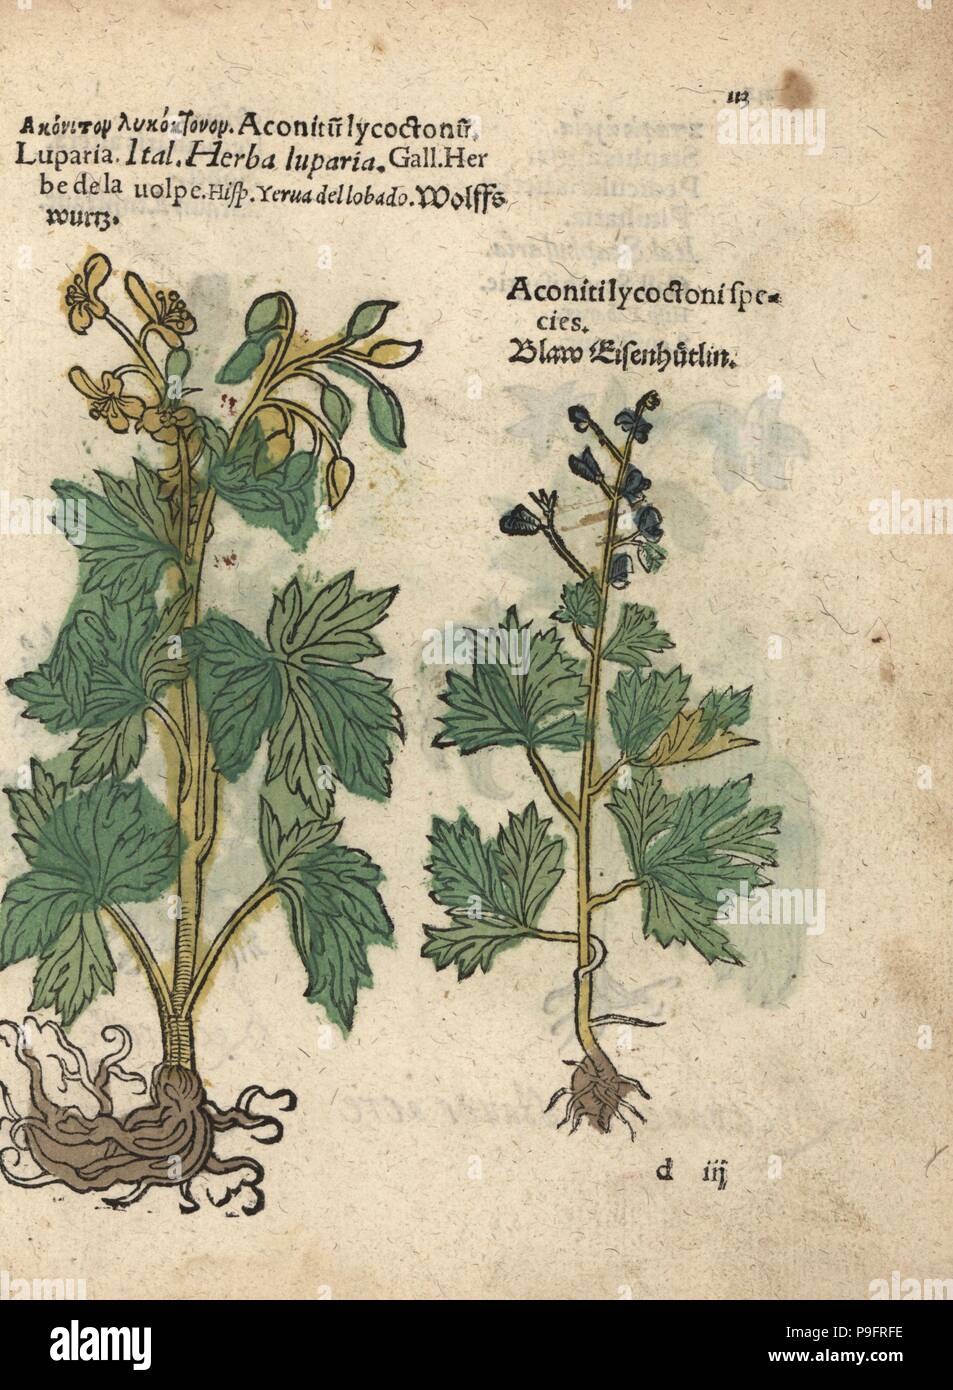 Northern wolfsbane species, Aconitum lycoctonum. Handcoloured woodblock engraving of a botanical illustration from Adam Lonicer's Krauterbuch, or Herbal, Frankfurt, 1557. This from a 17th century pirate edition or atlas of illustrations only, with captions in Latin, Greek, French, Italian, German, and in English manuscript. Stock Photo